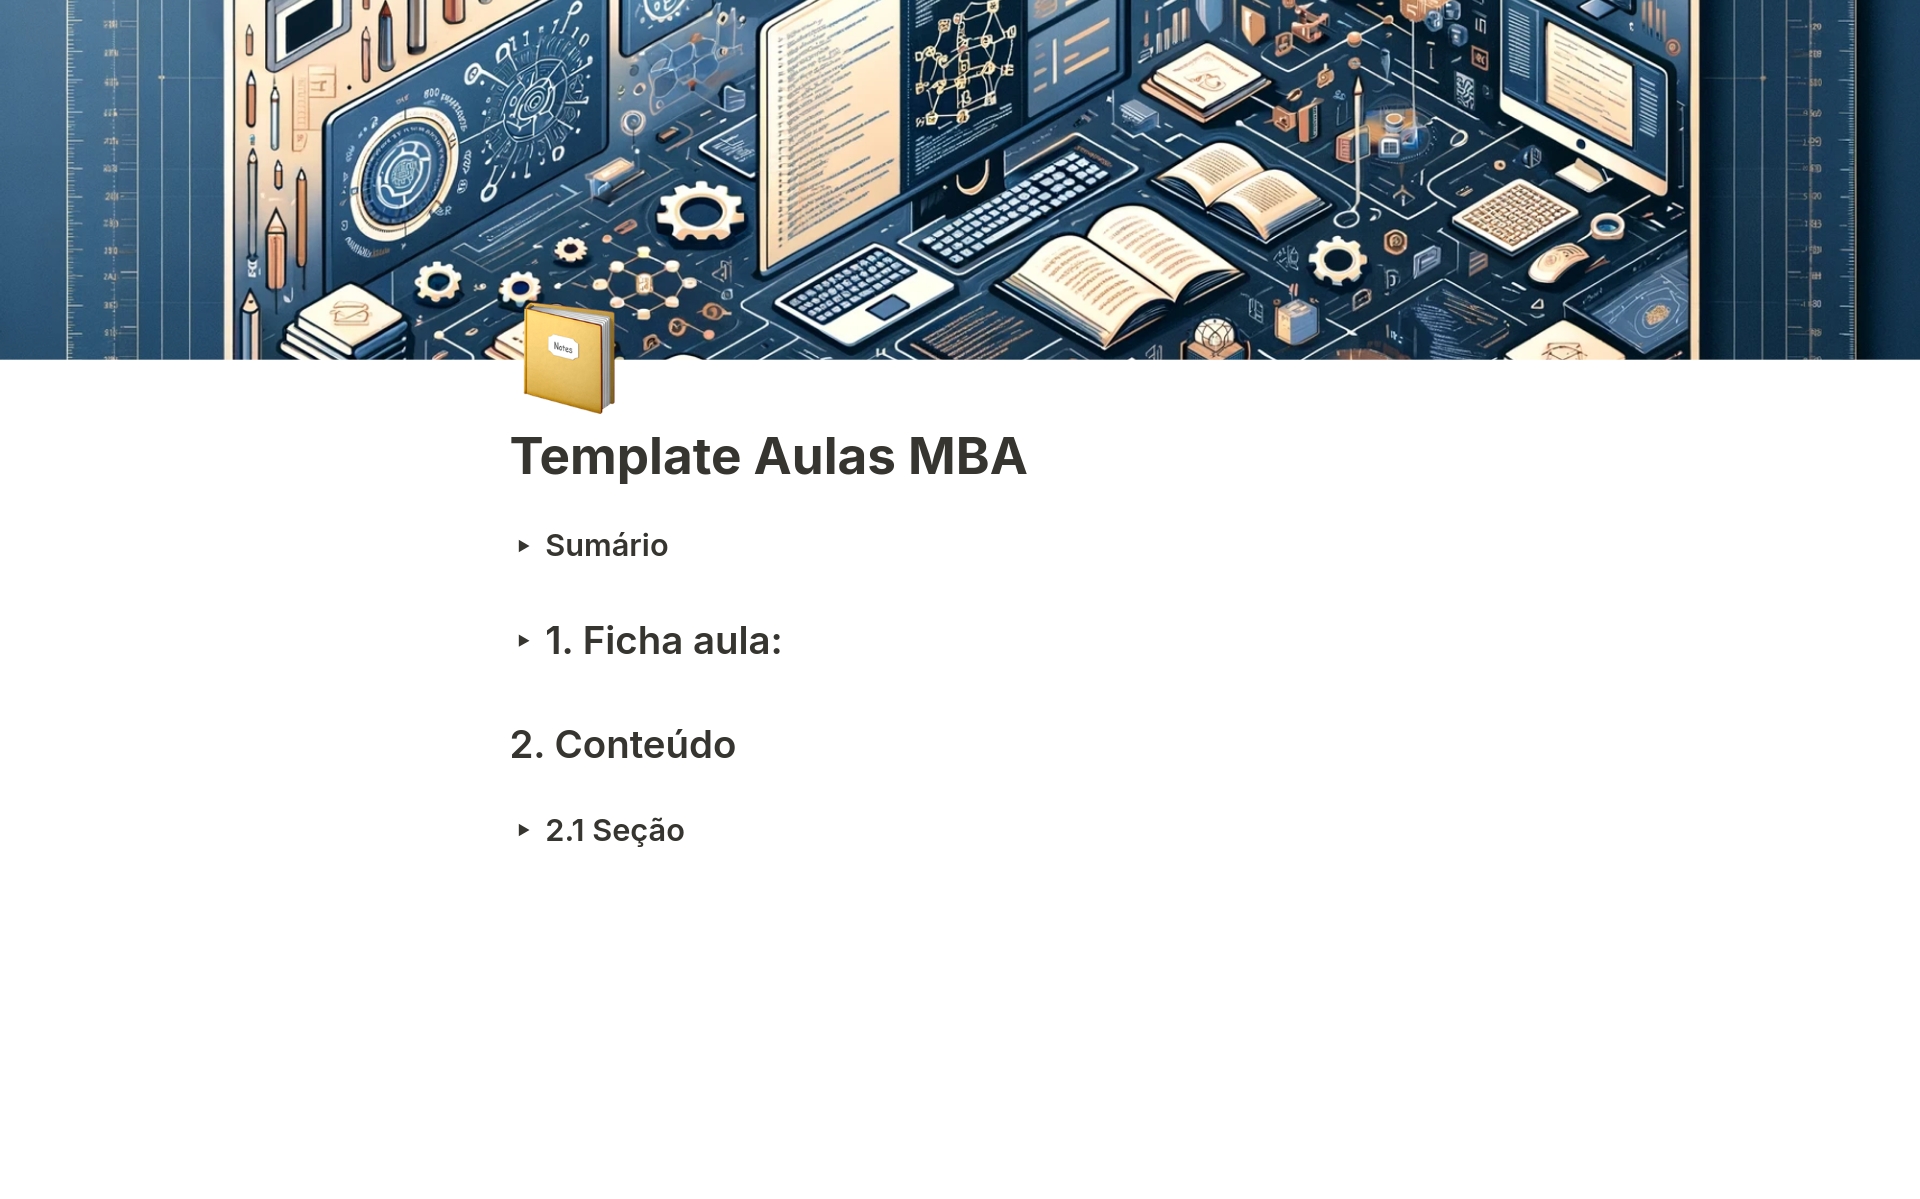 A template preview for Aulas MBA